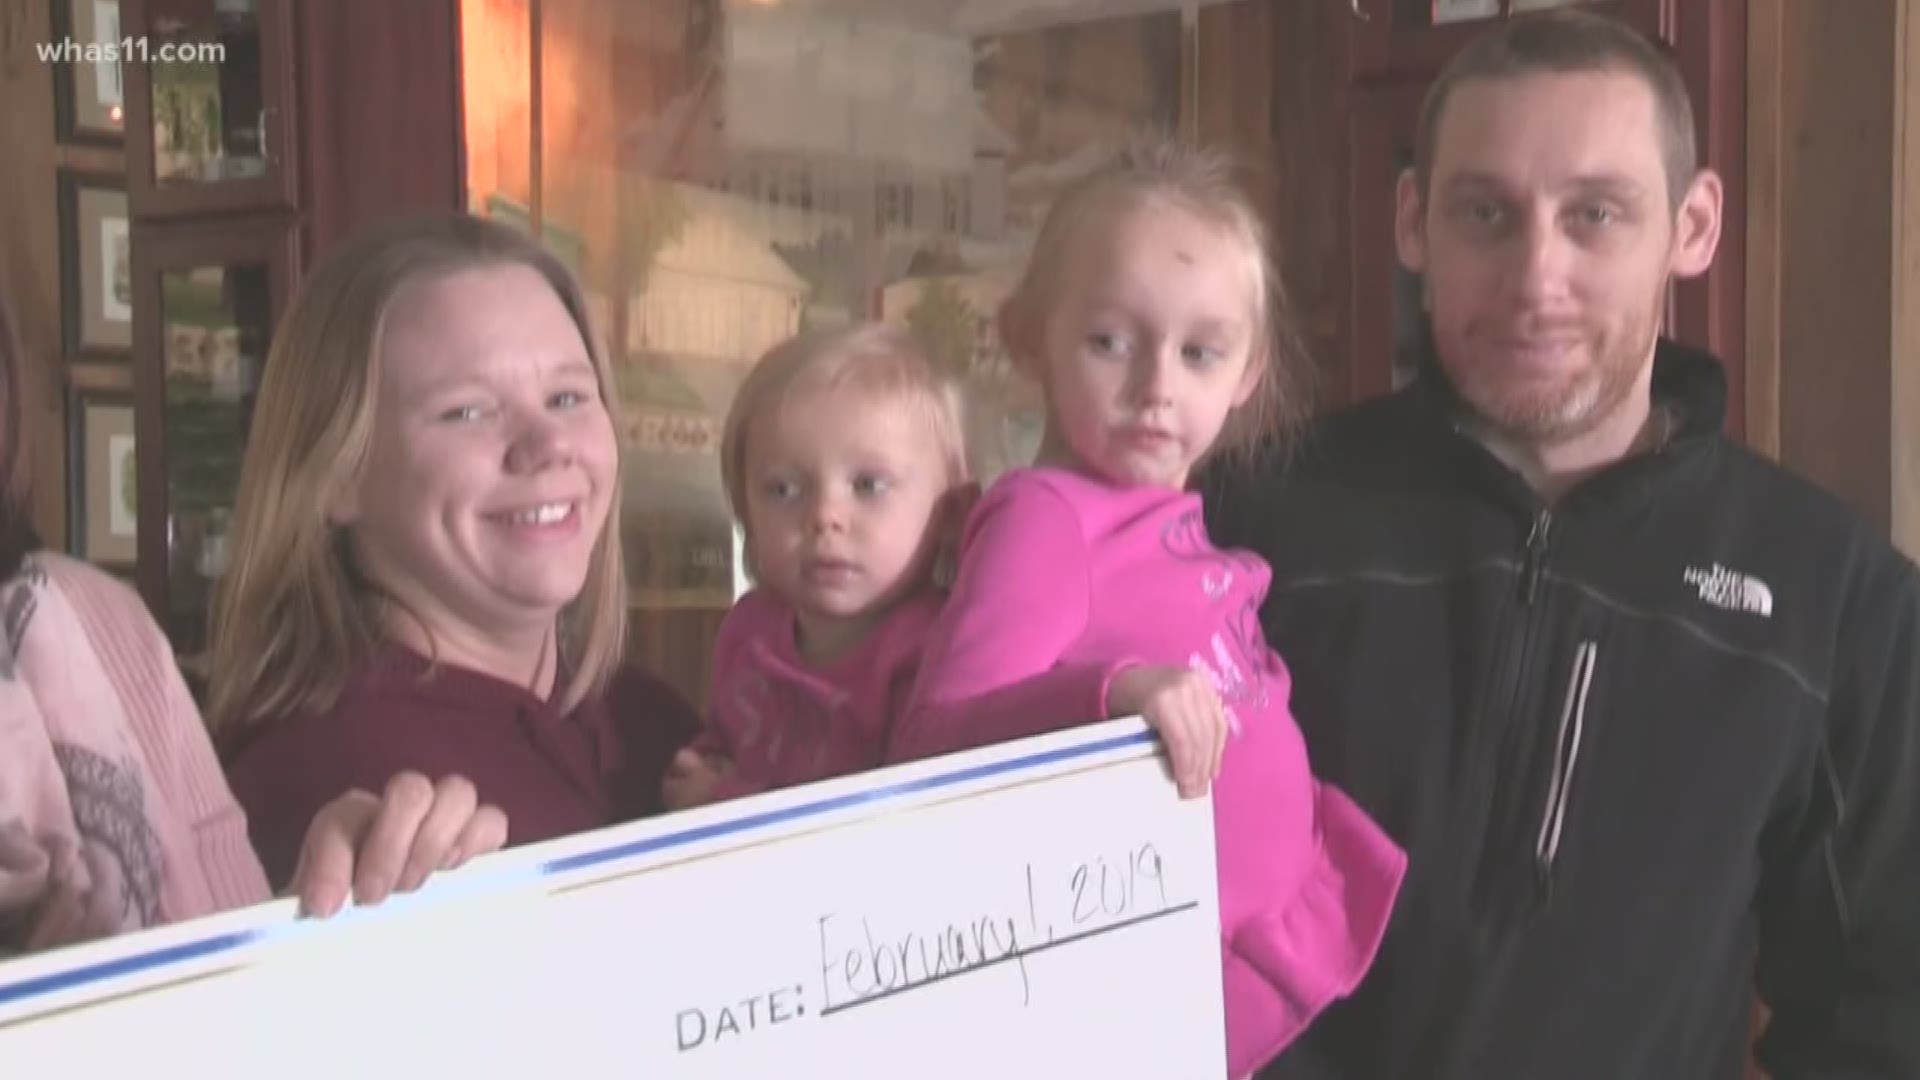 Jenna Huber Clem, a third generation owner of the Huber Family Farm and Restaurant, presented the Crusade for Children with $16,833 from their GoFundMe page.